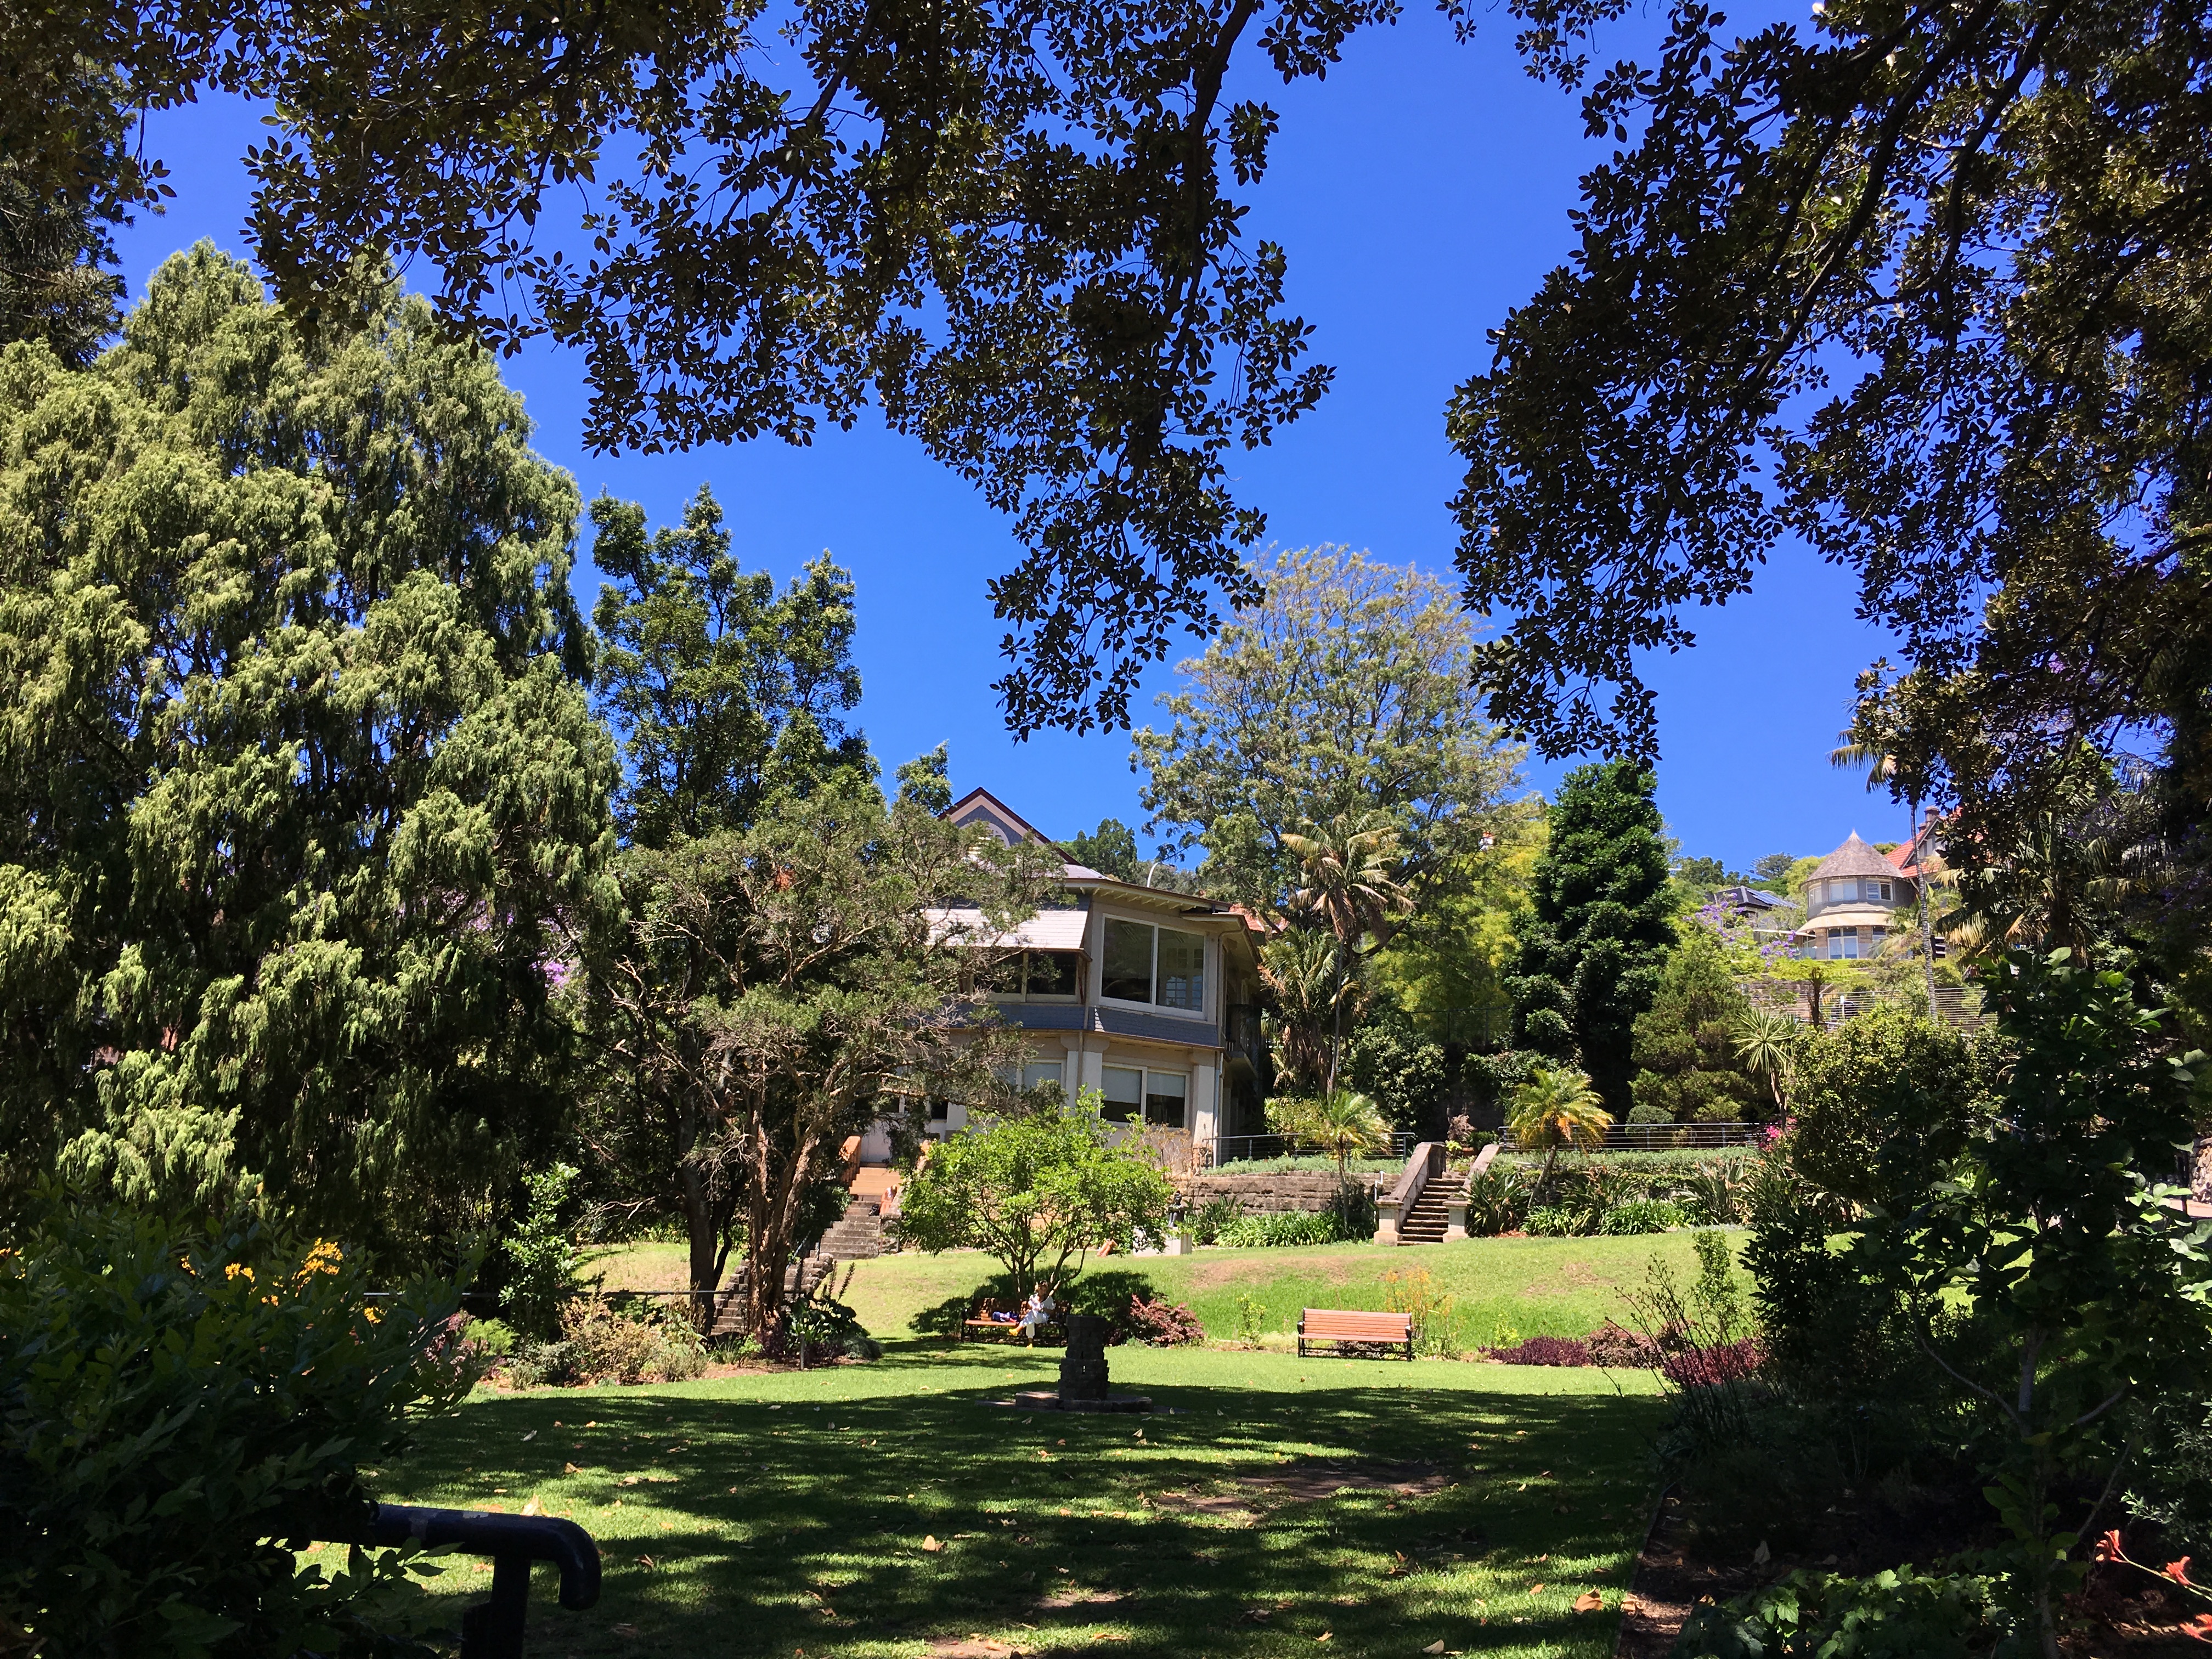 Woollahra Library – Part 1 – The Olden Days